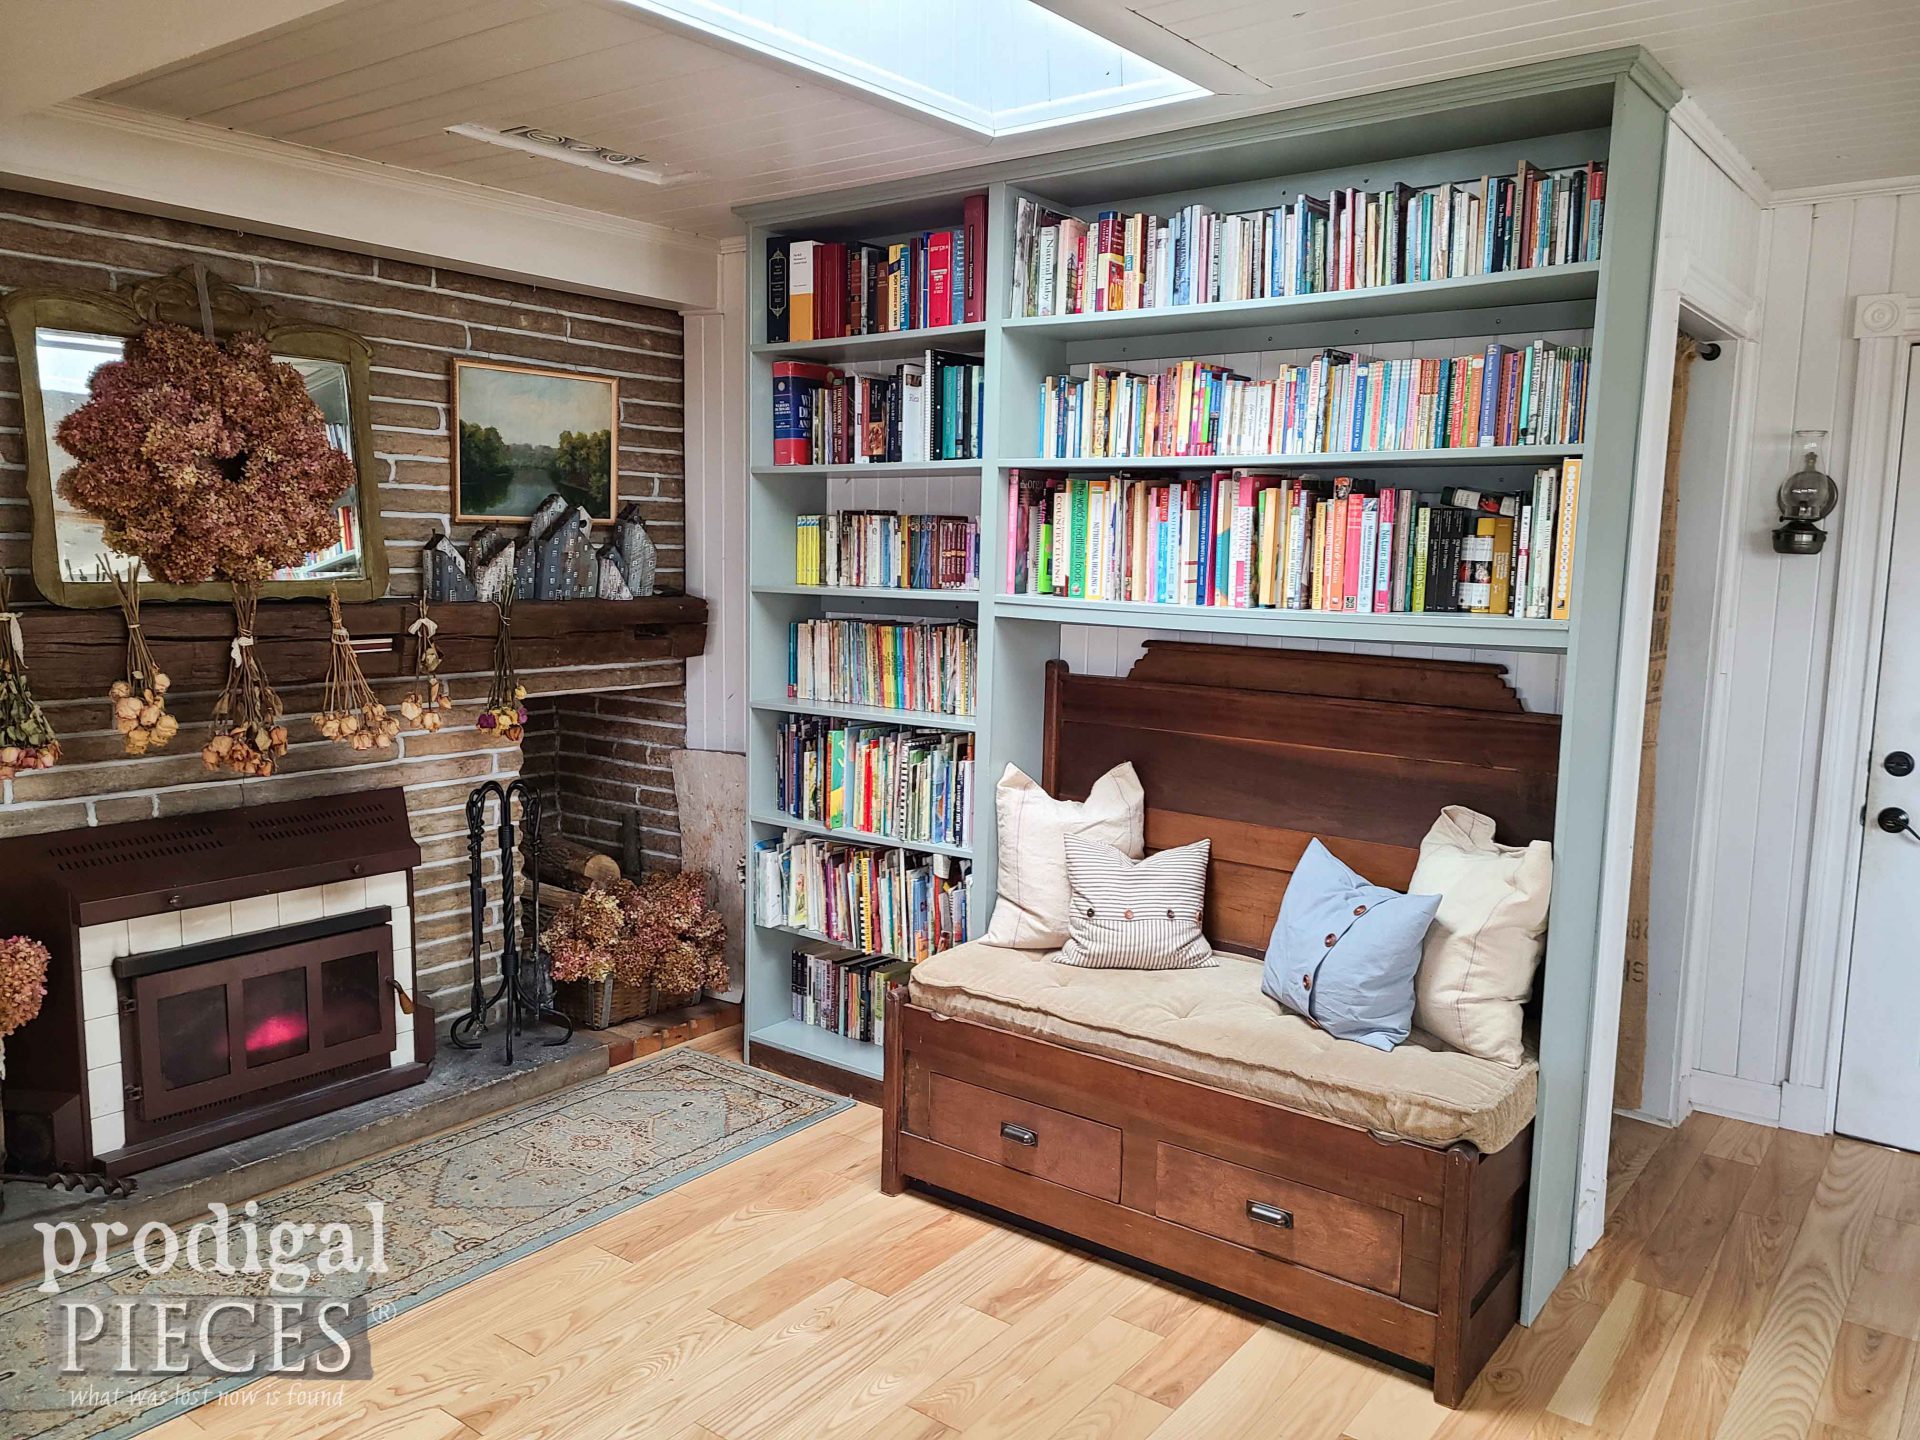 DIY Built-in Bookcase in Family Room Remodel by JC & Larissa of Prodigal Pieces | prodigalpieces.com #prodigalpieces #floors #farmhouse #home #diy